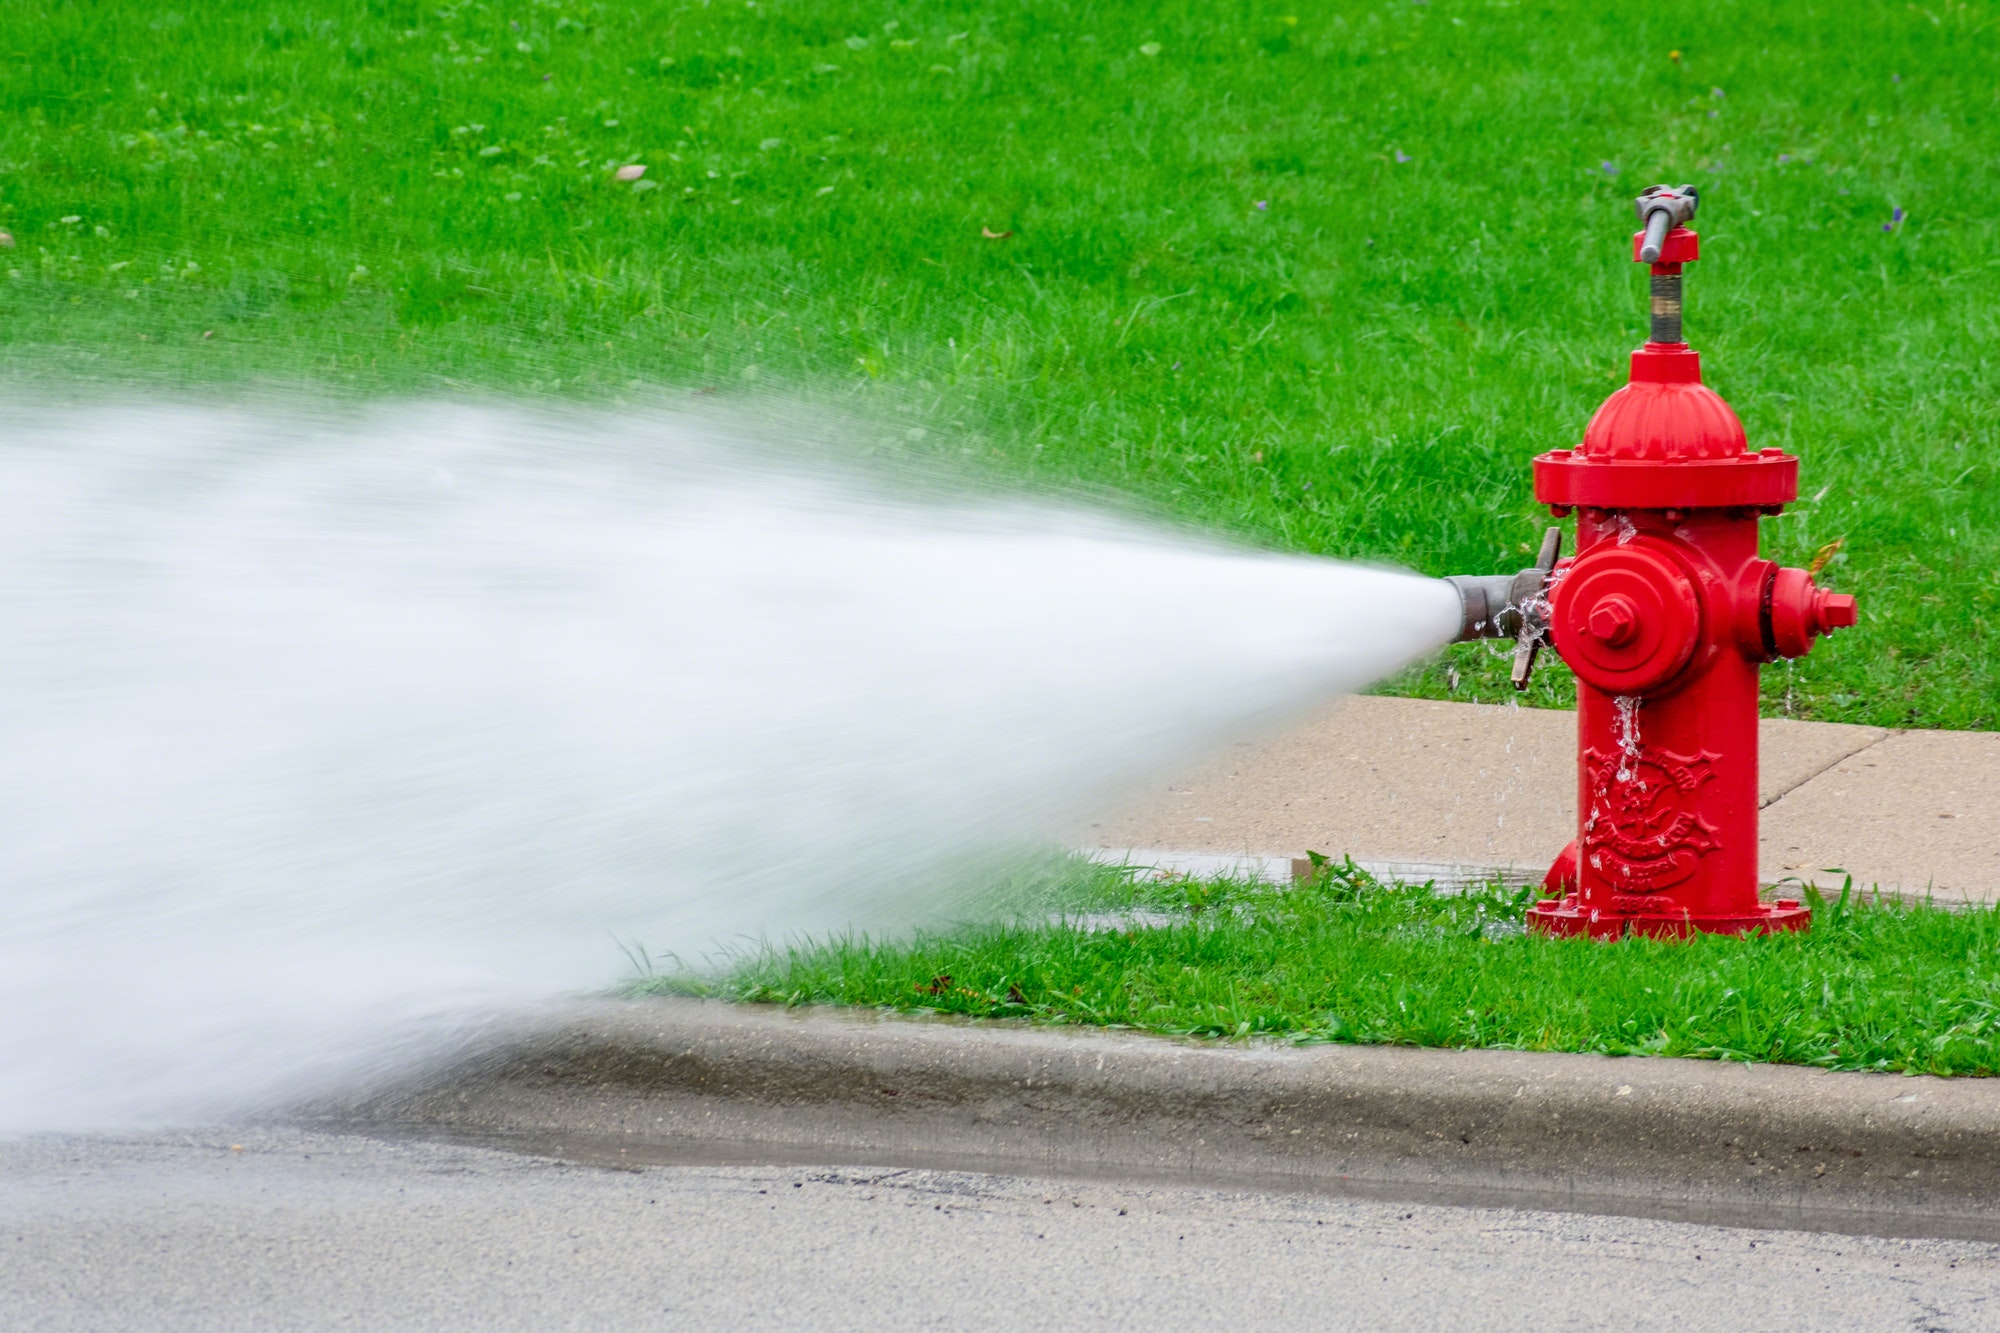 Red fire hydrant with high pressure water spray